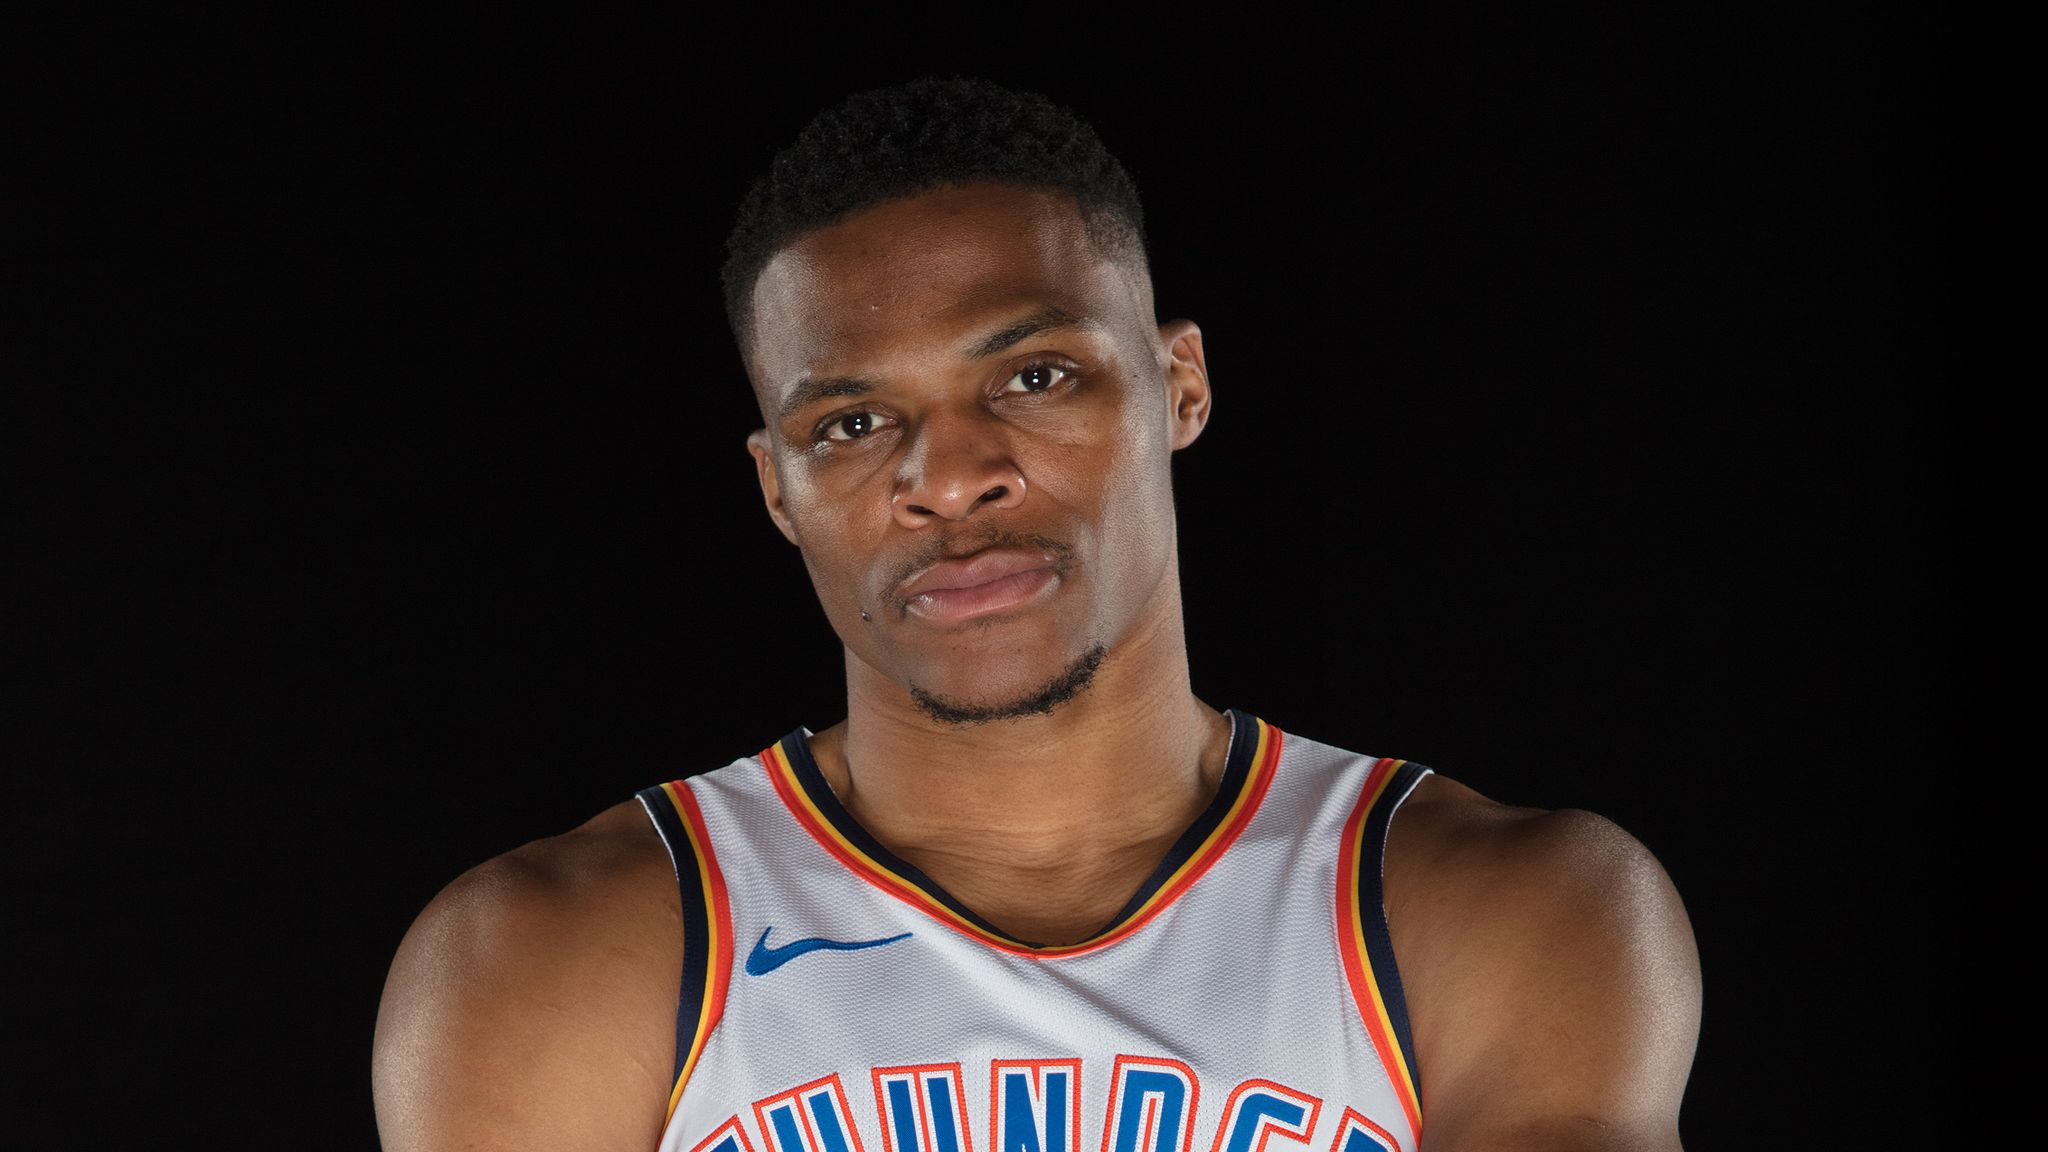 Russell Westbrook, Thunder posing serious threat to Warriors